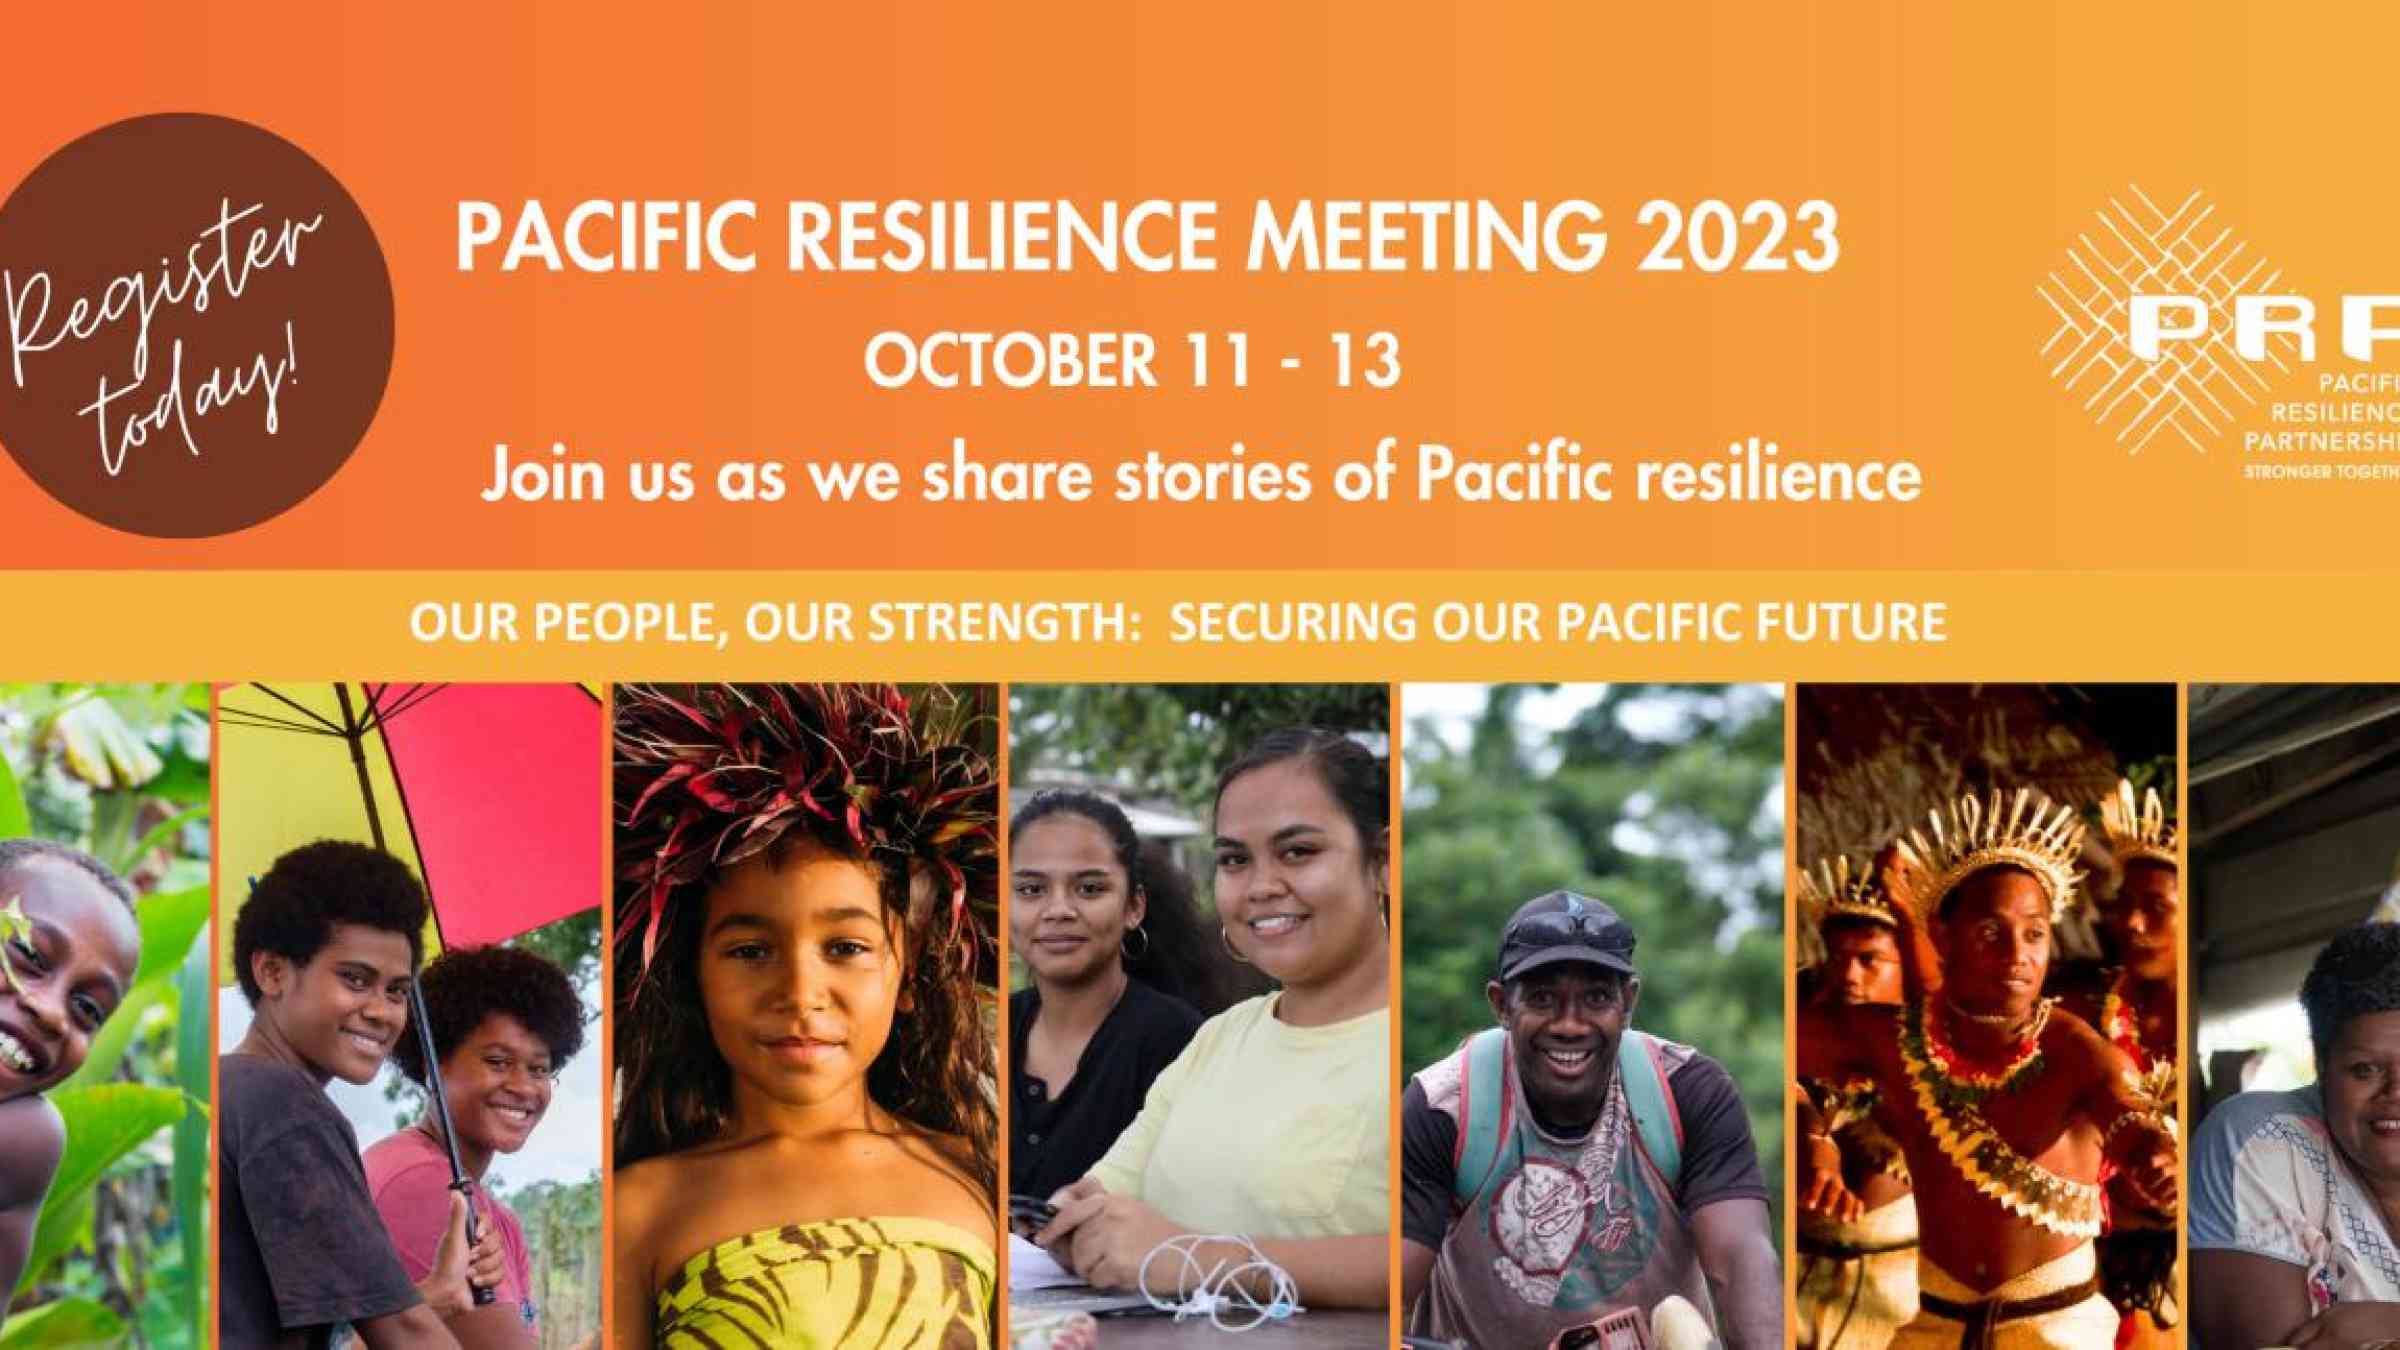 Banner for the Pacific Resilience Meeting 2023